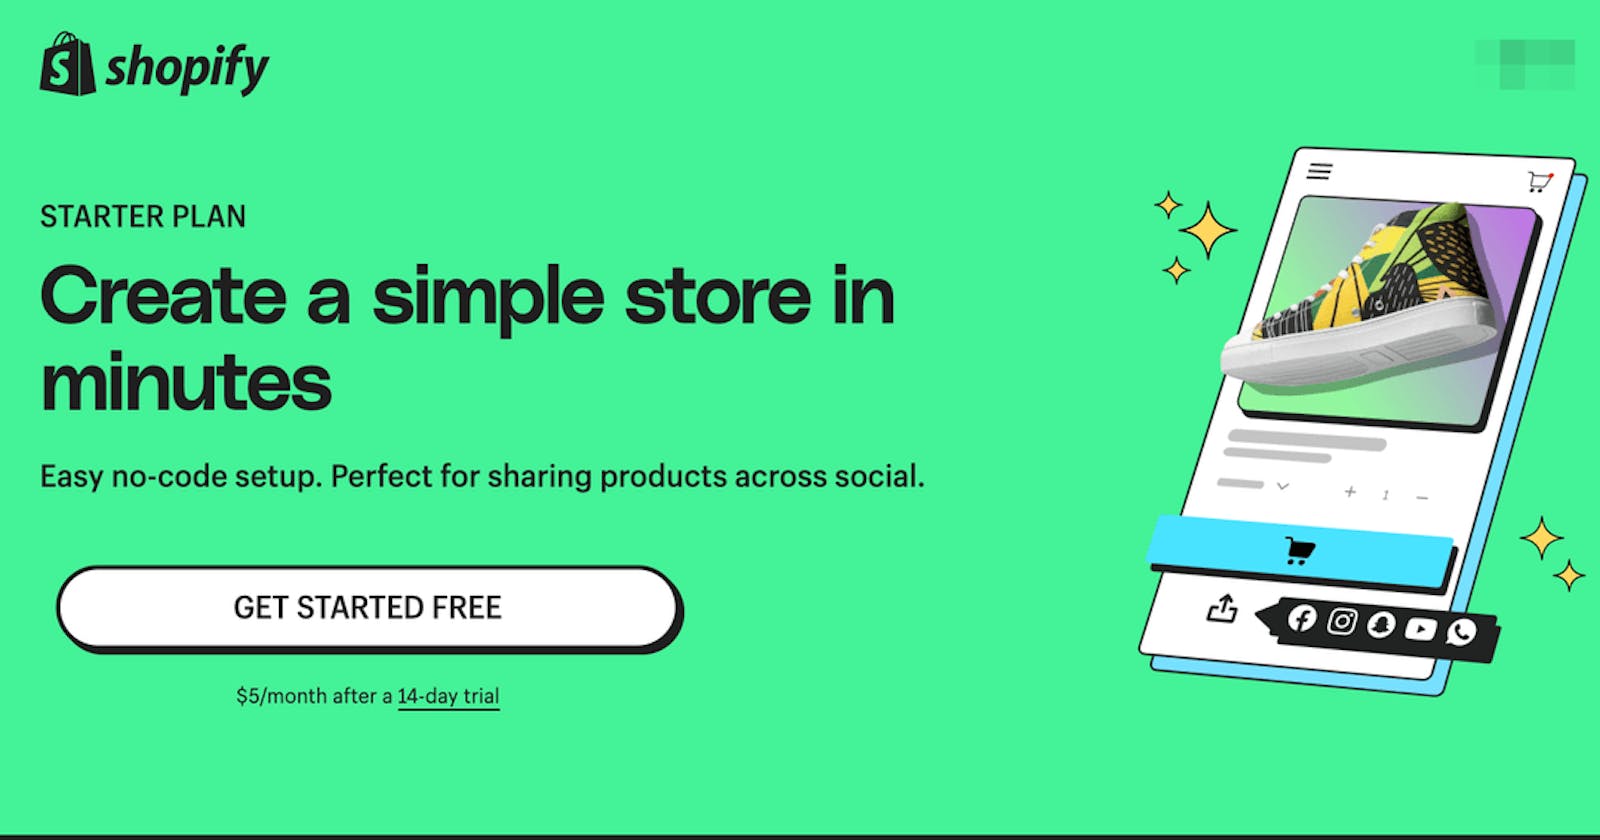 Shopify Starter Plan: How to Sell on Shopify for Only $5